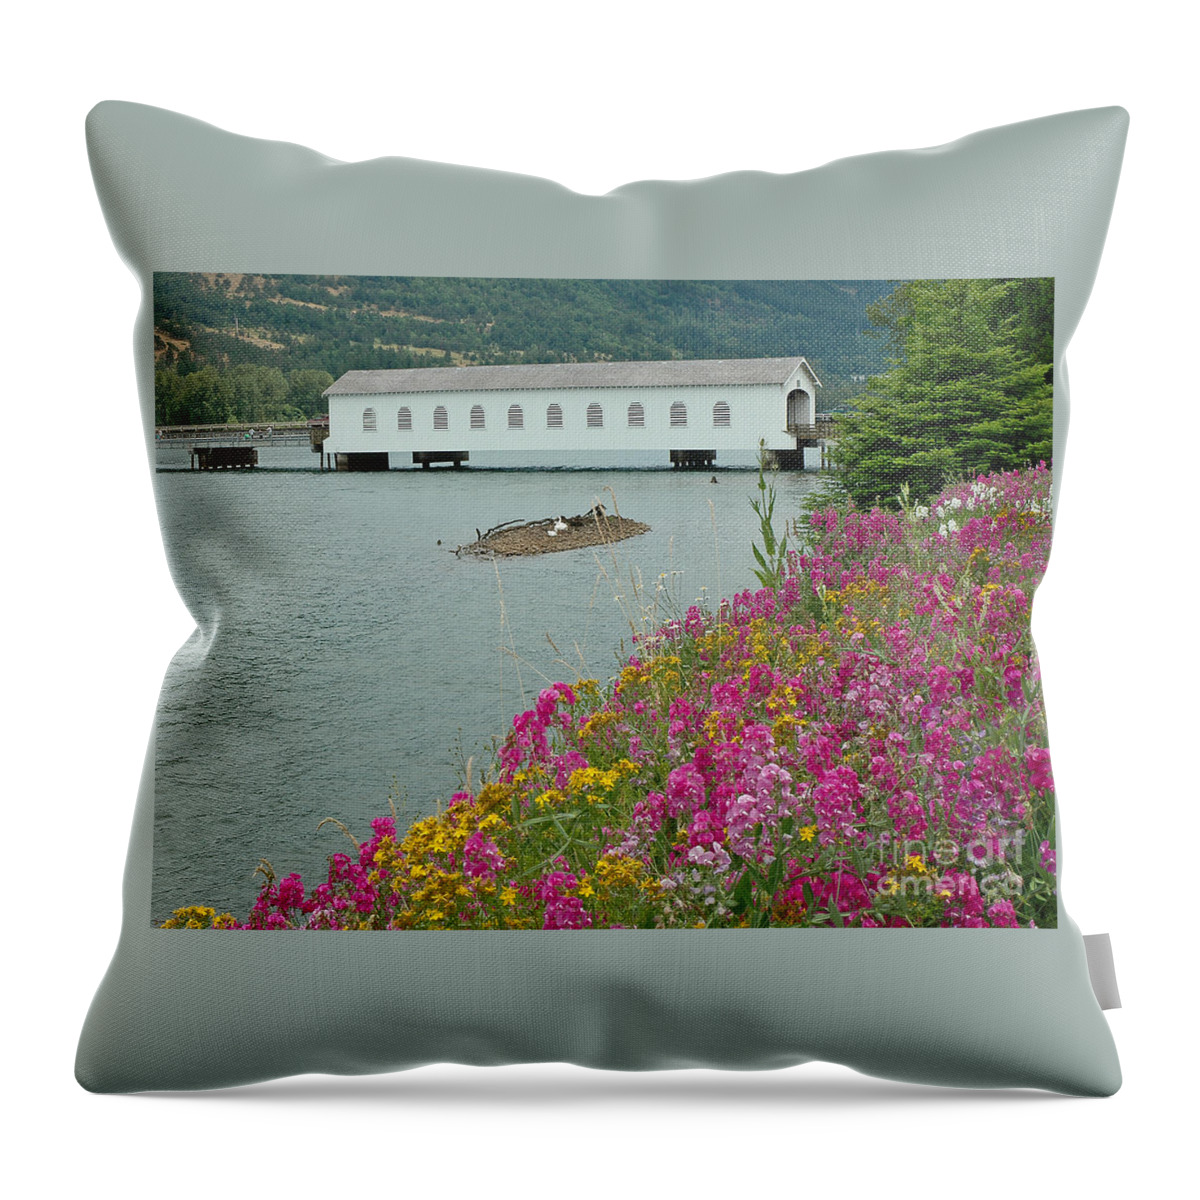 Pacific Throw Pillow featuring the photograph Lowell Covered Bridge by Nick Boren